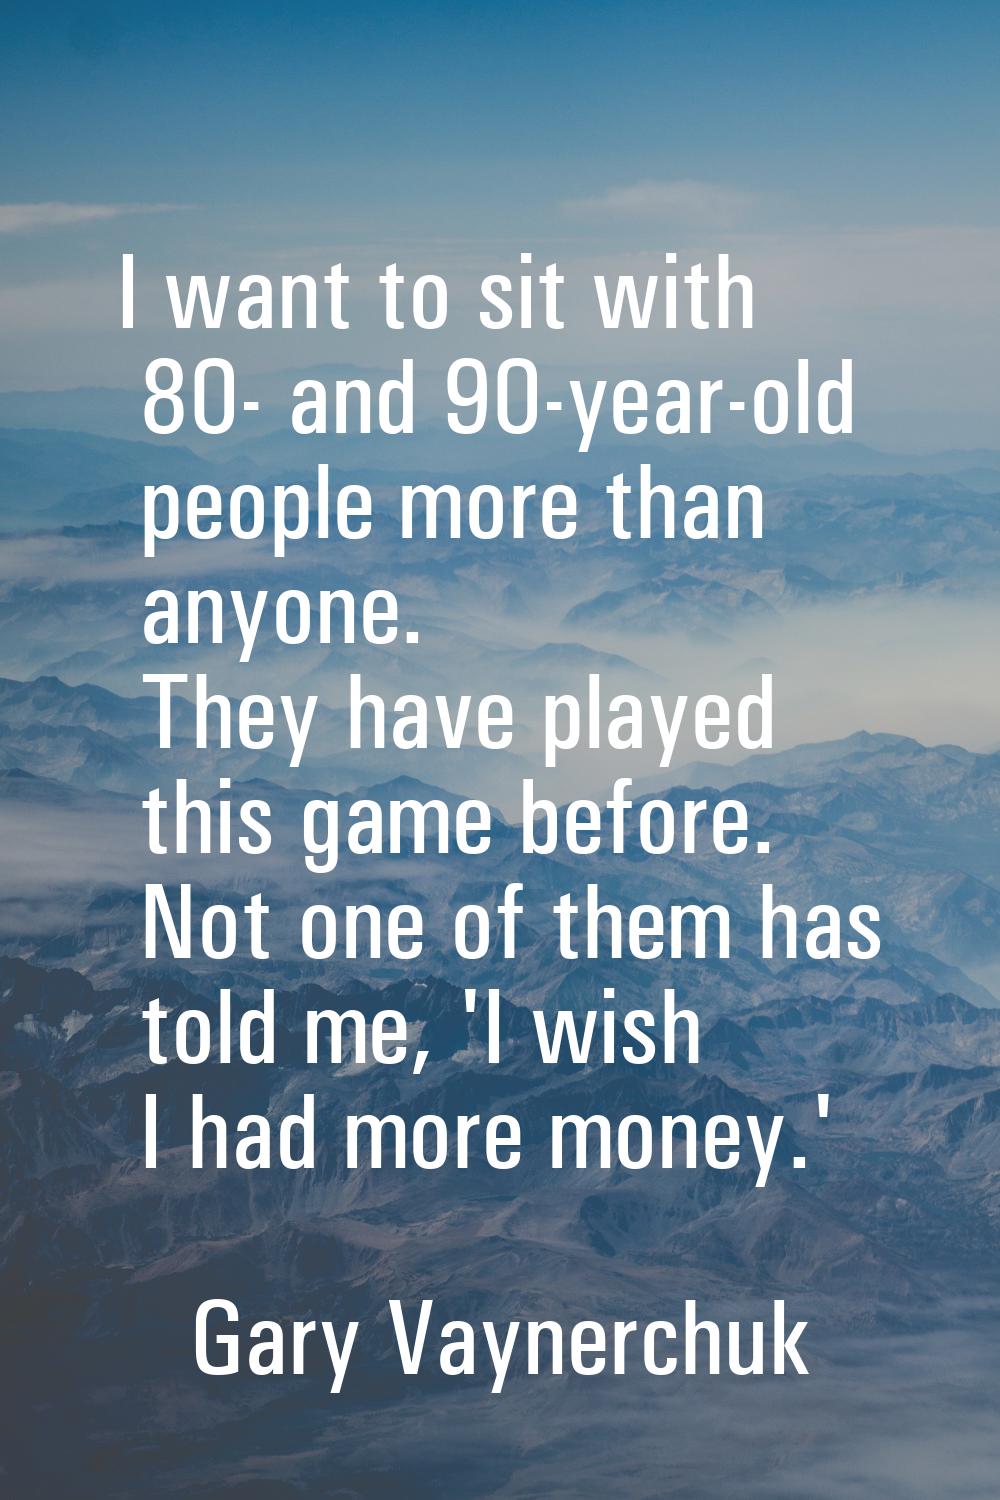 I want to sit with 80- and 90-year-old people more than anyone. They have played this game before. 